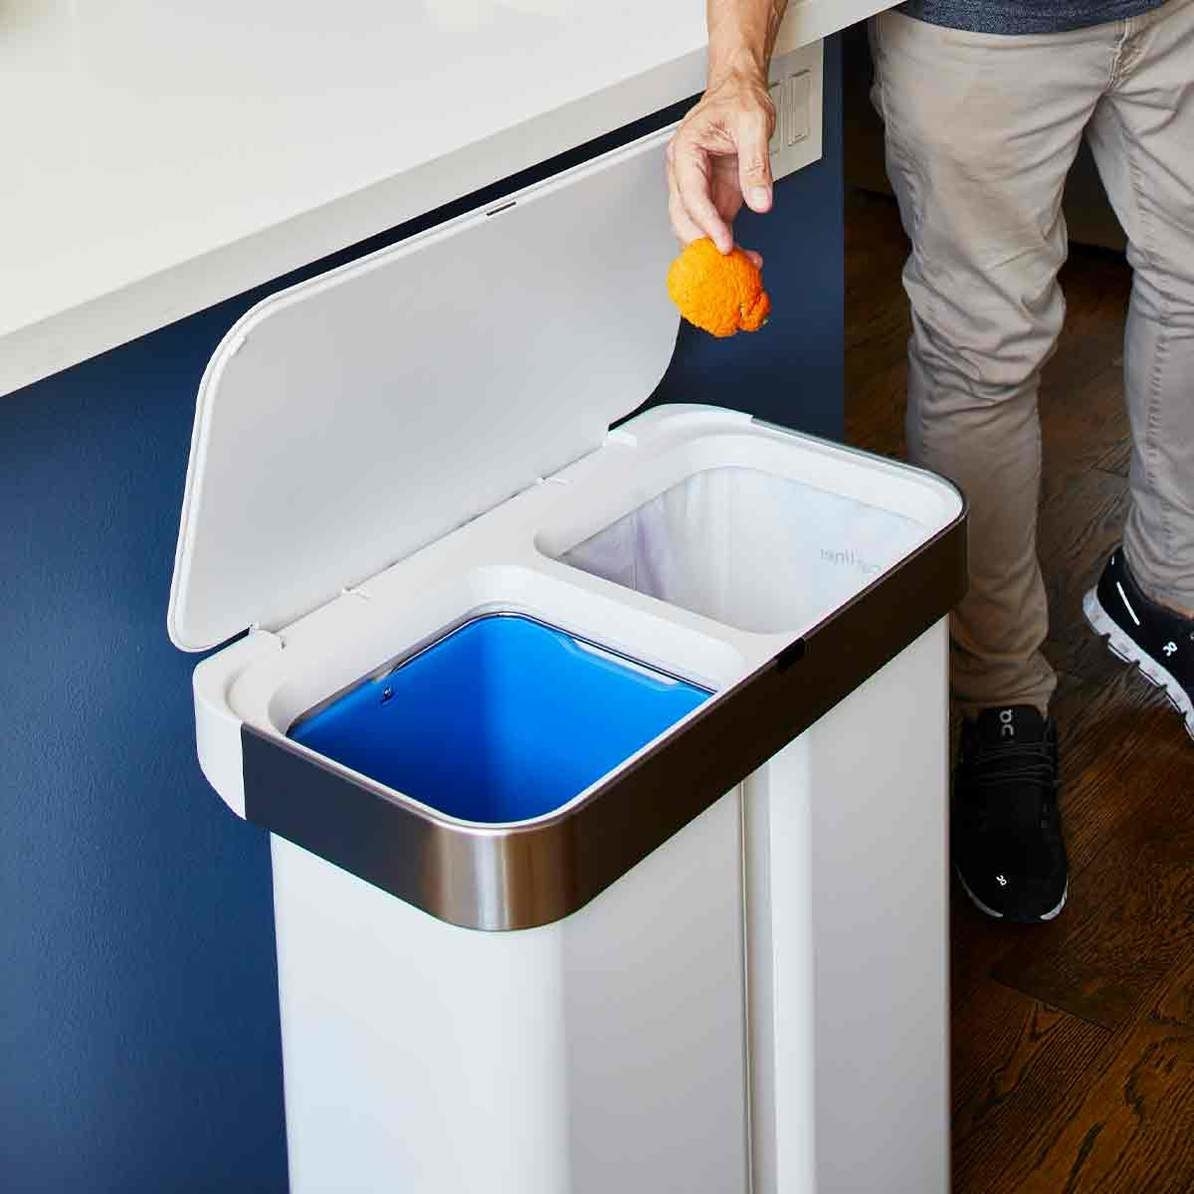 A person throwing an orange peel in the trash can